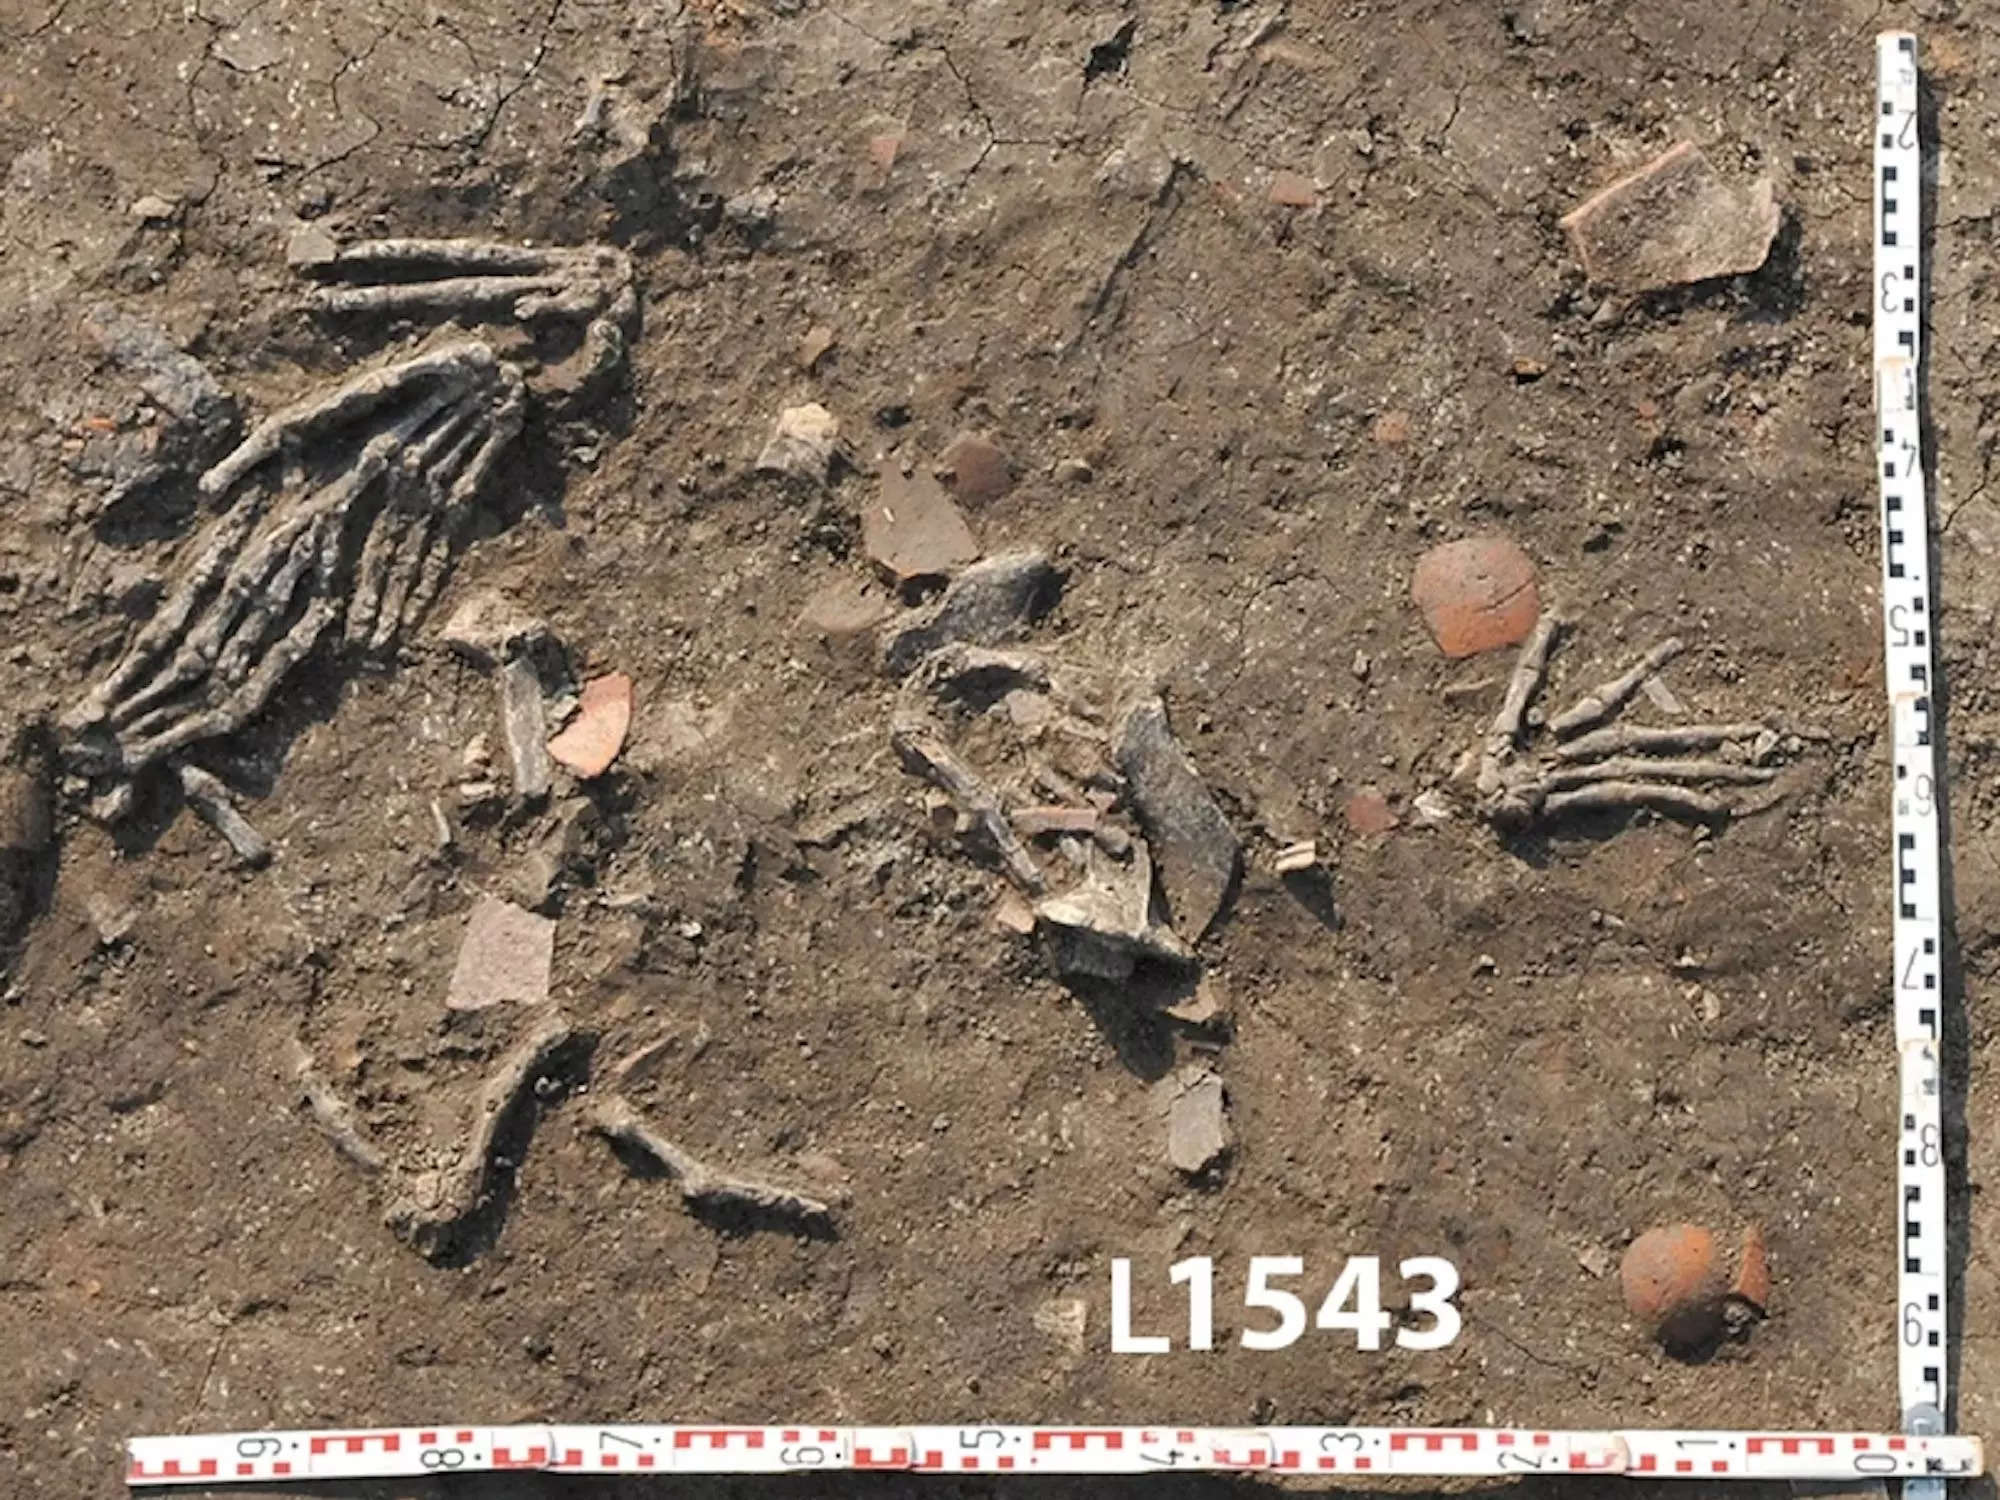 A picture shows the remains of a hand splayed out in the ground